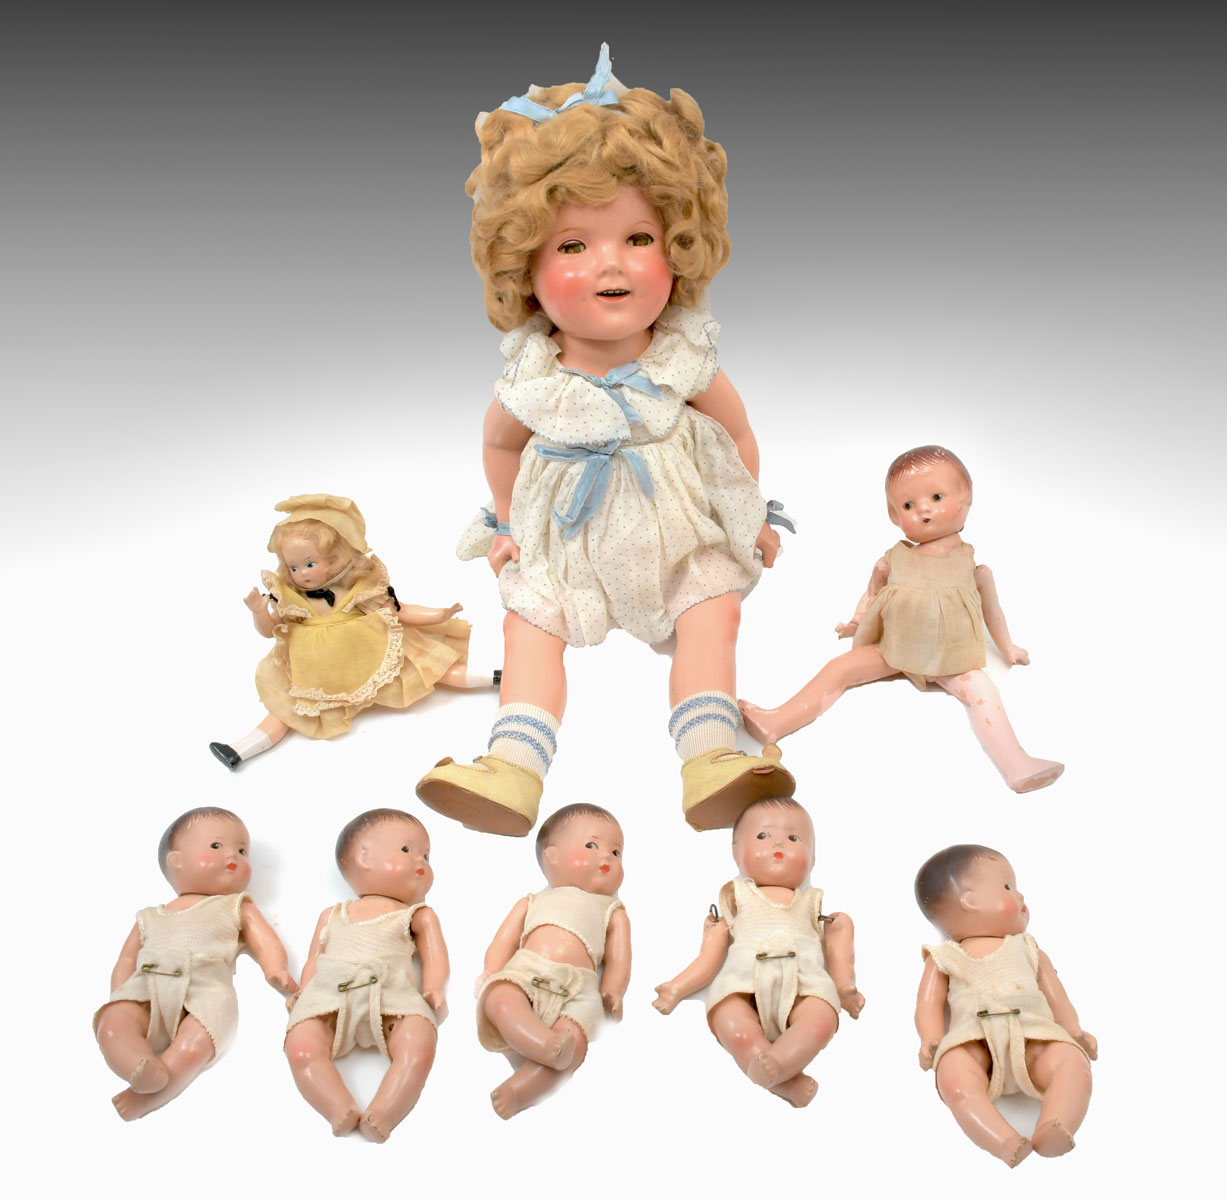 8 PC DOLL COLLECTION Comprising  36ca41